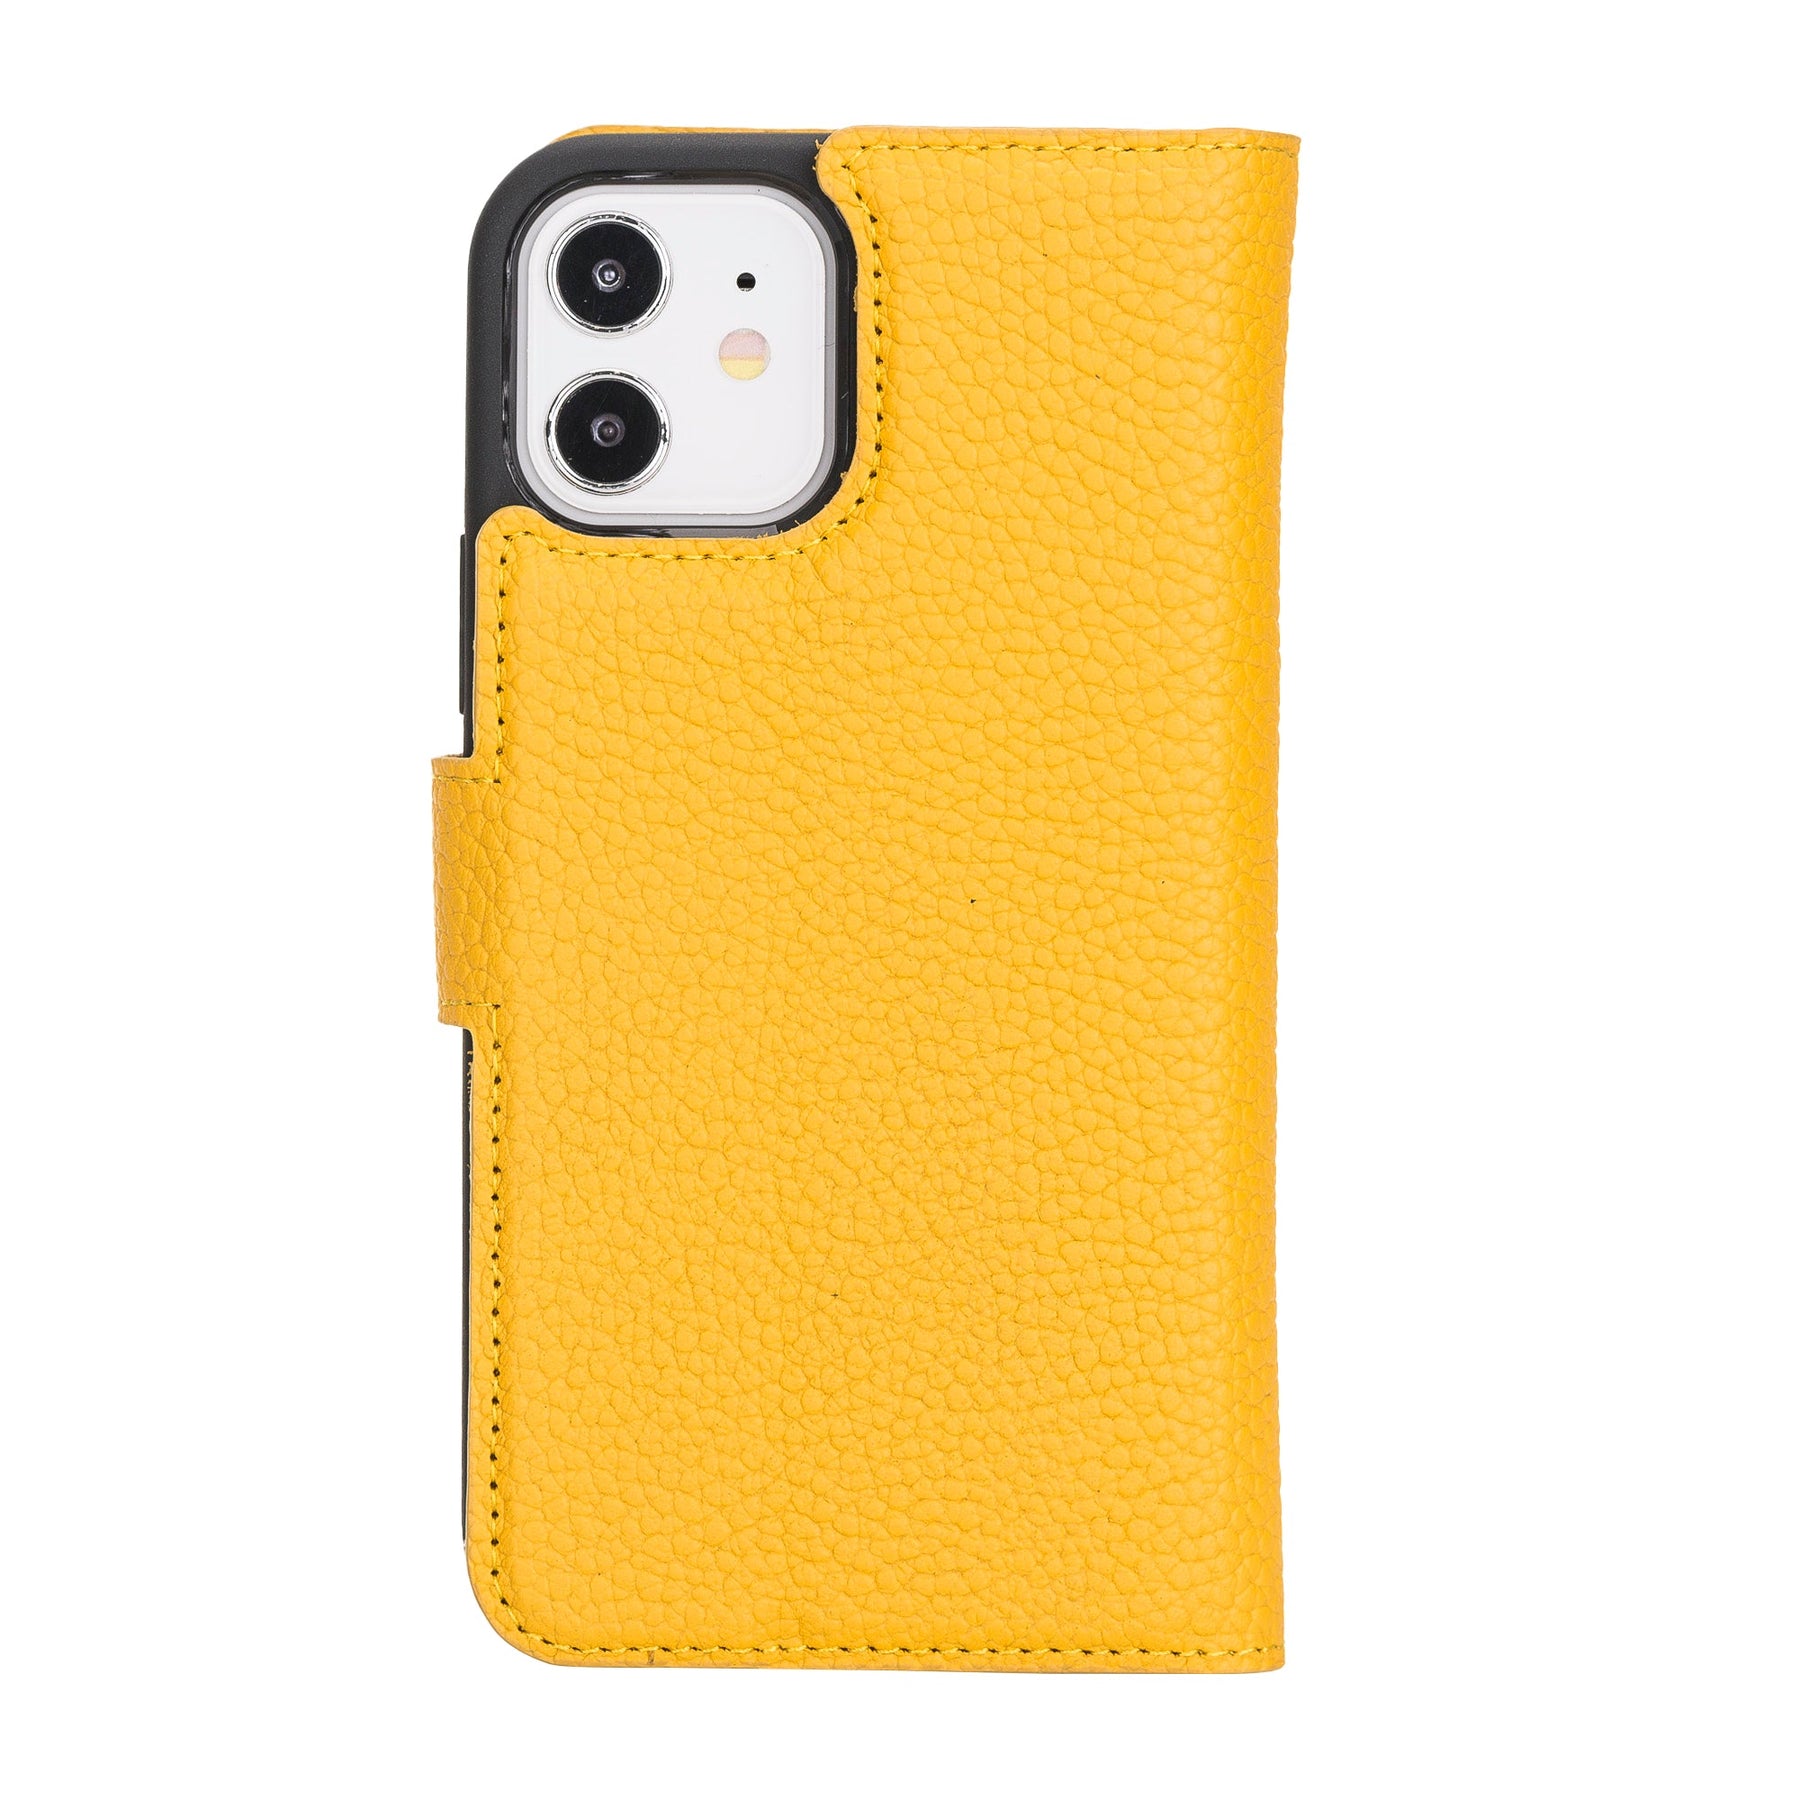 Magic Case iPhone 12 (6.1") - Tuscany Geel - Oblac